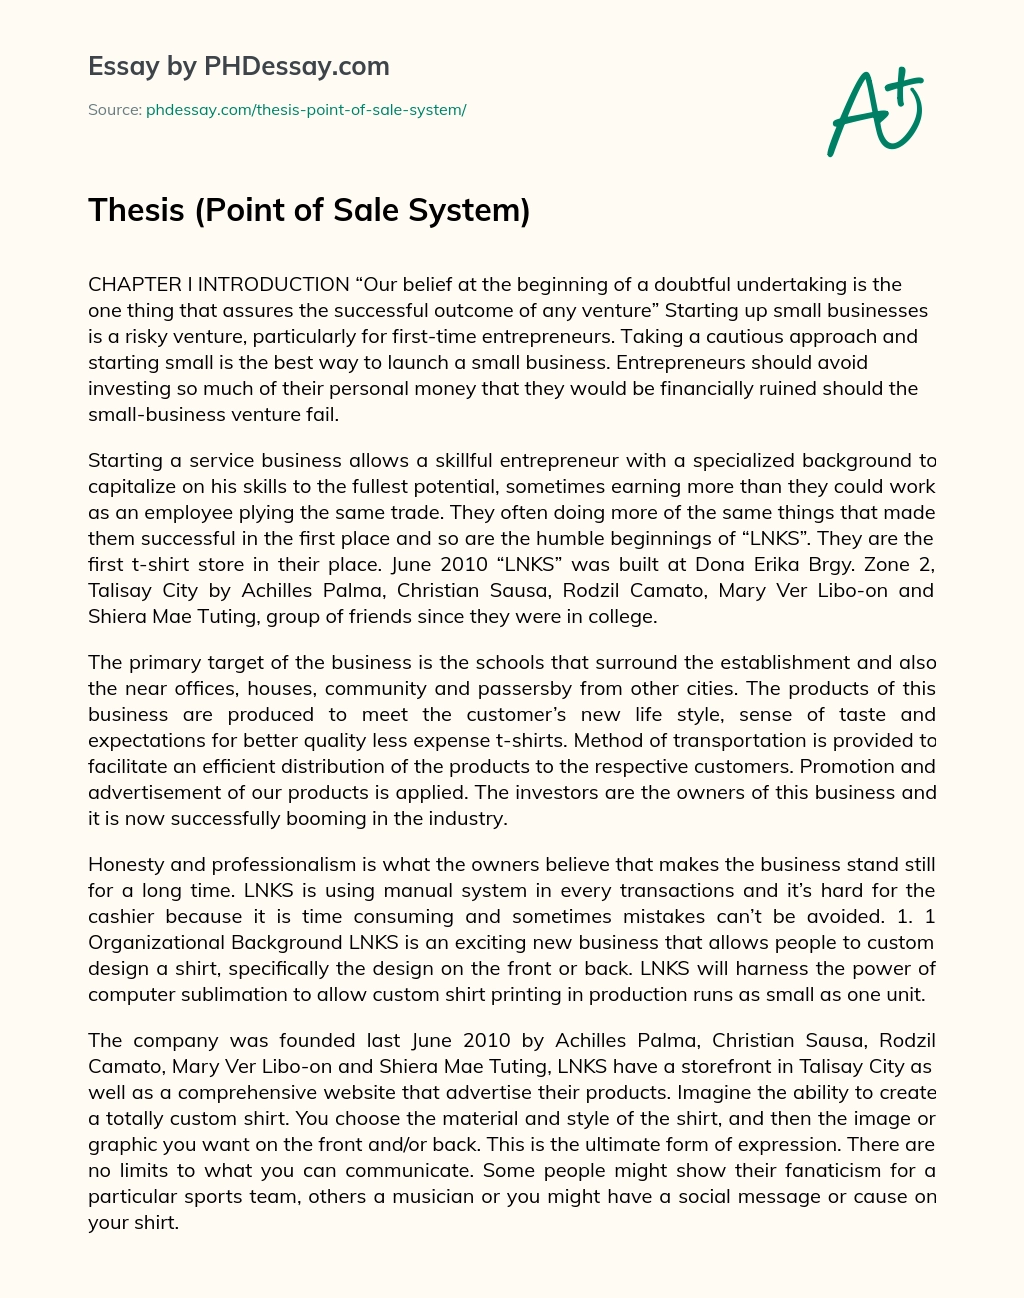 point of sale thesis